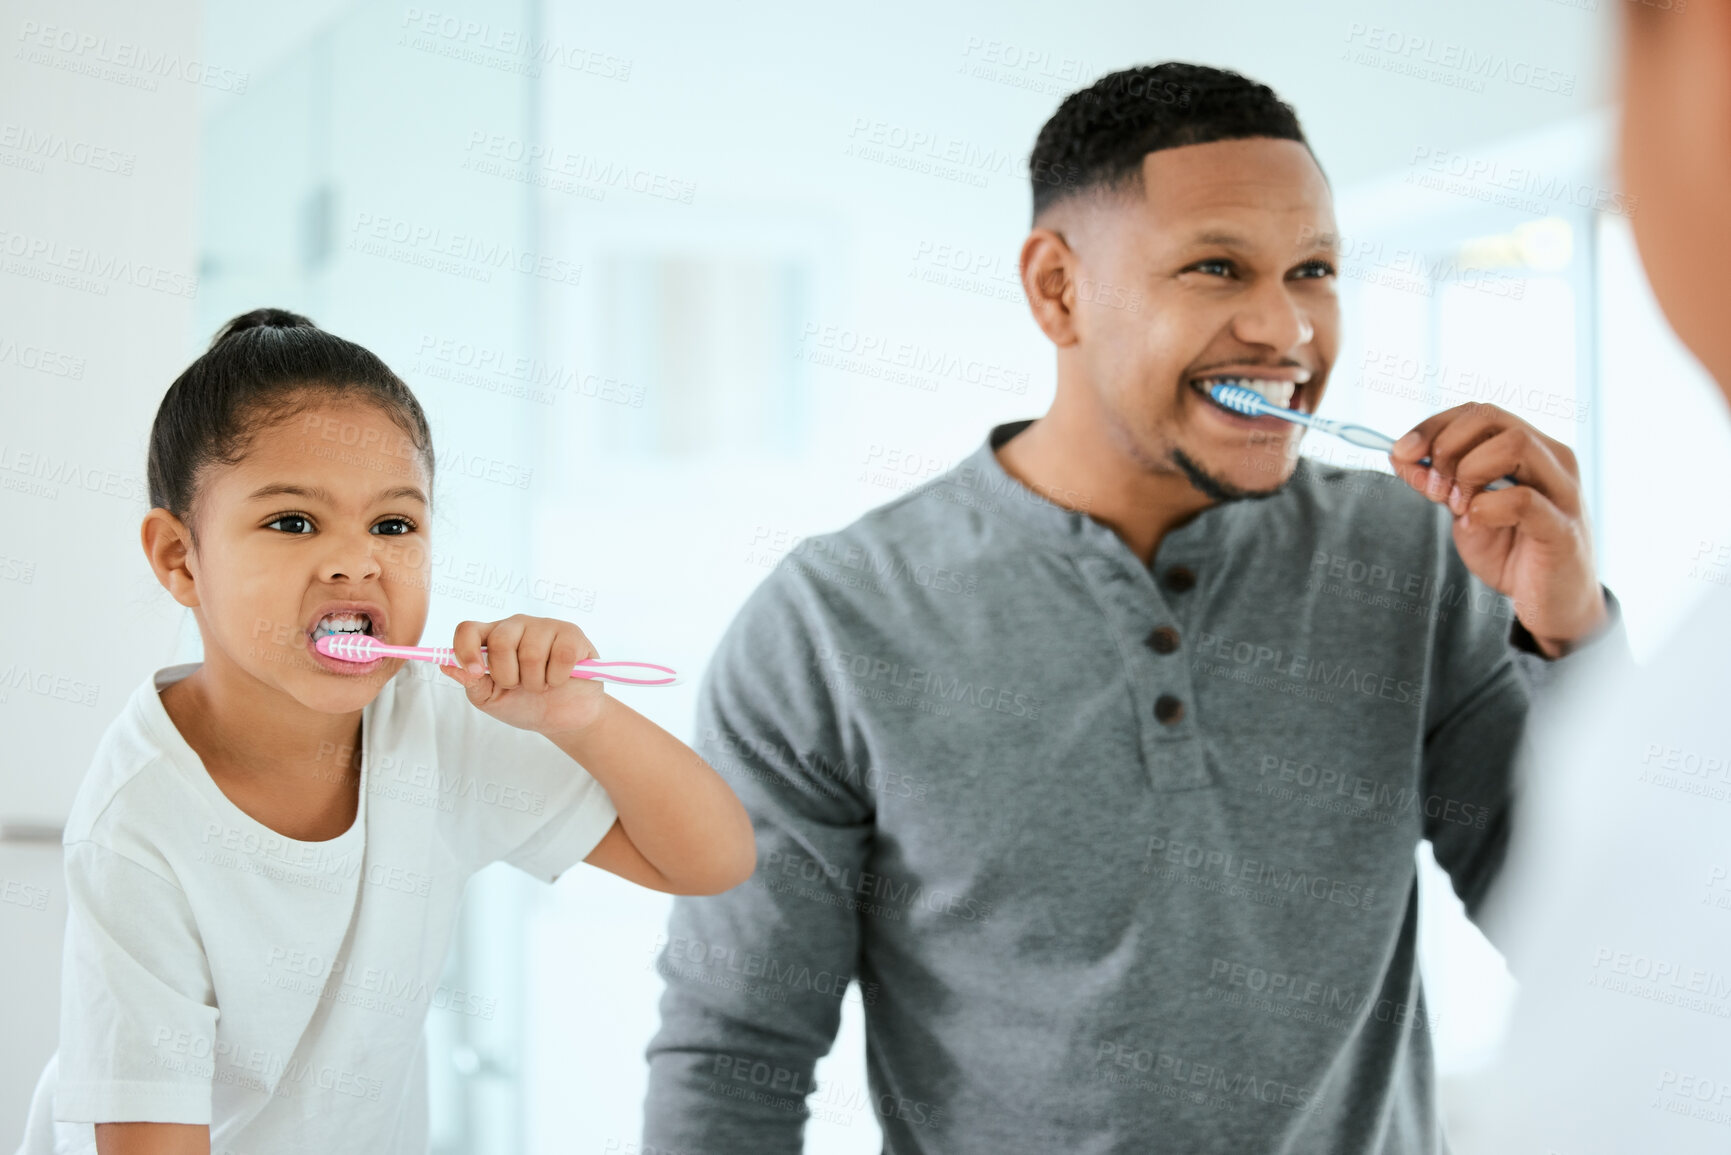 Buy stock photo Shot of an adorable little girl and her father brushing their teeth together at home